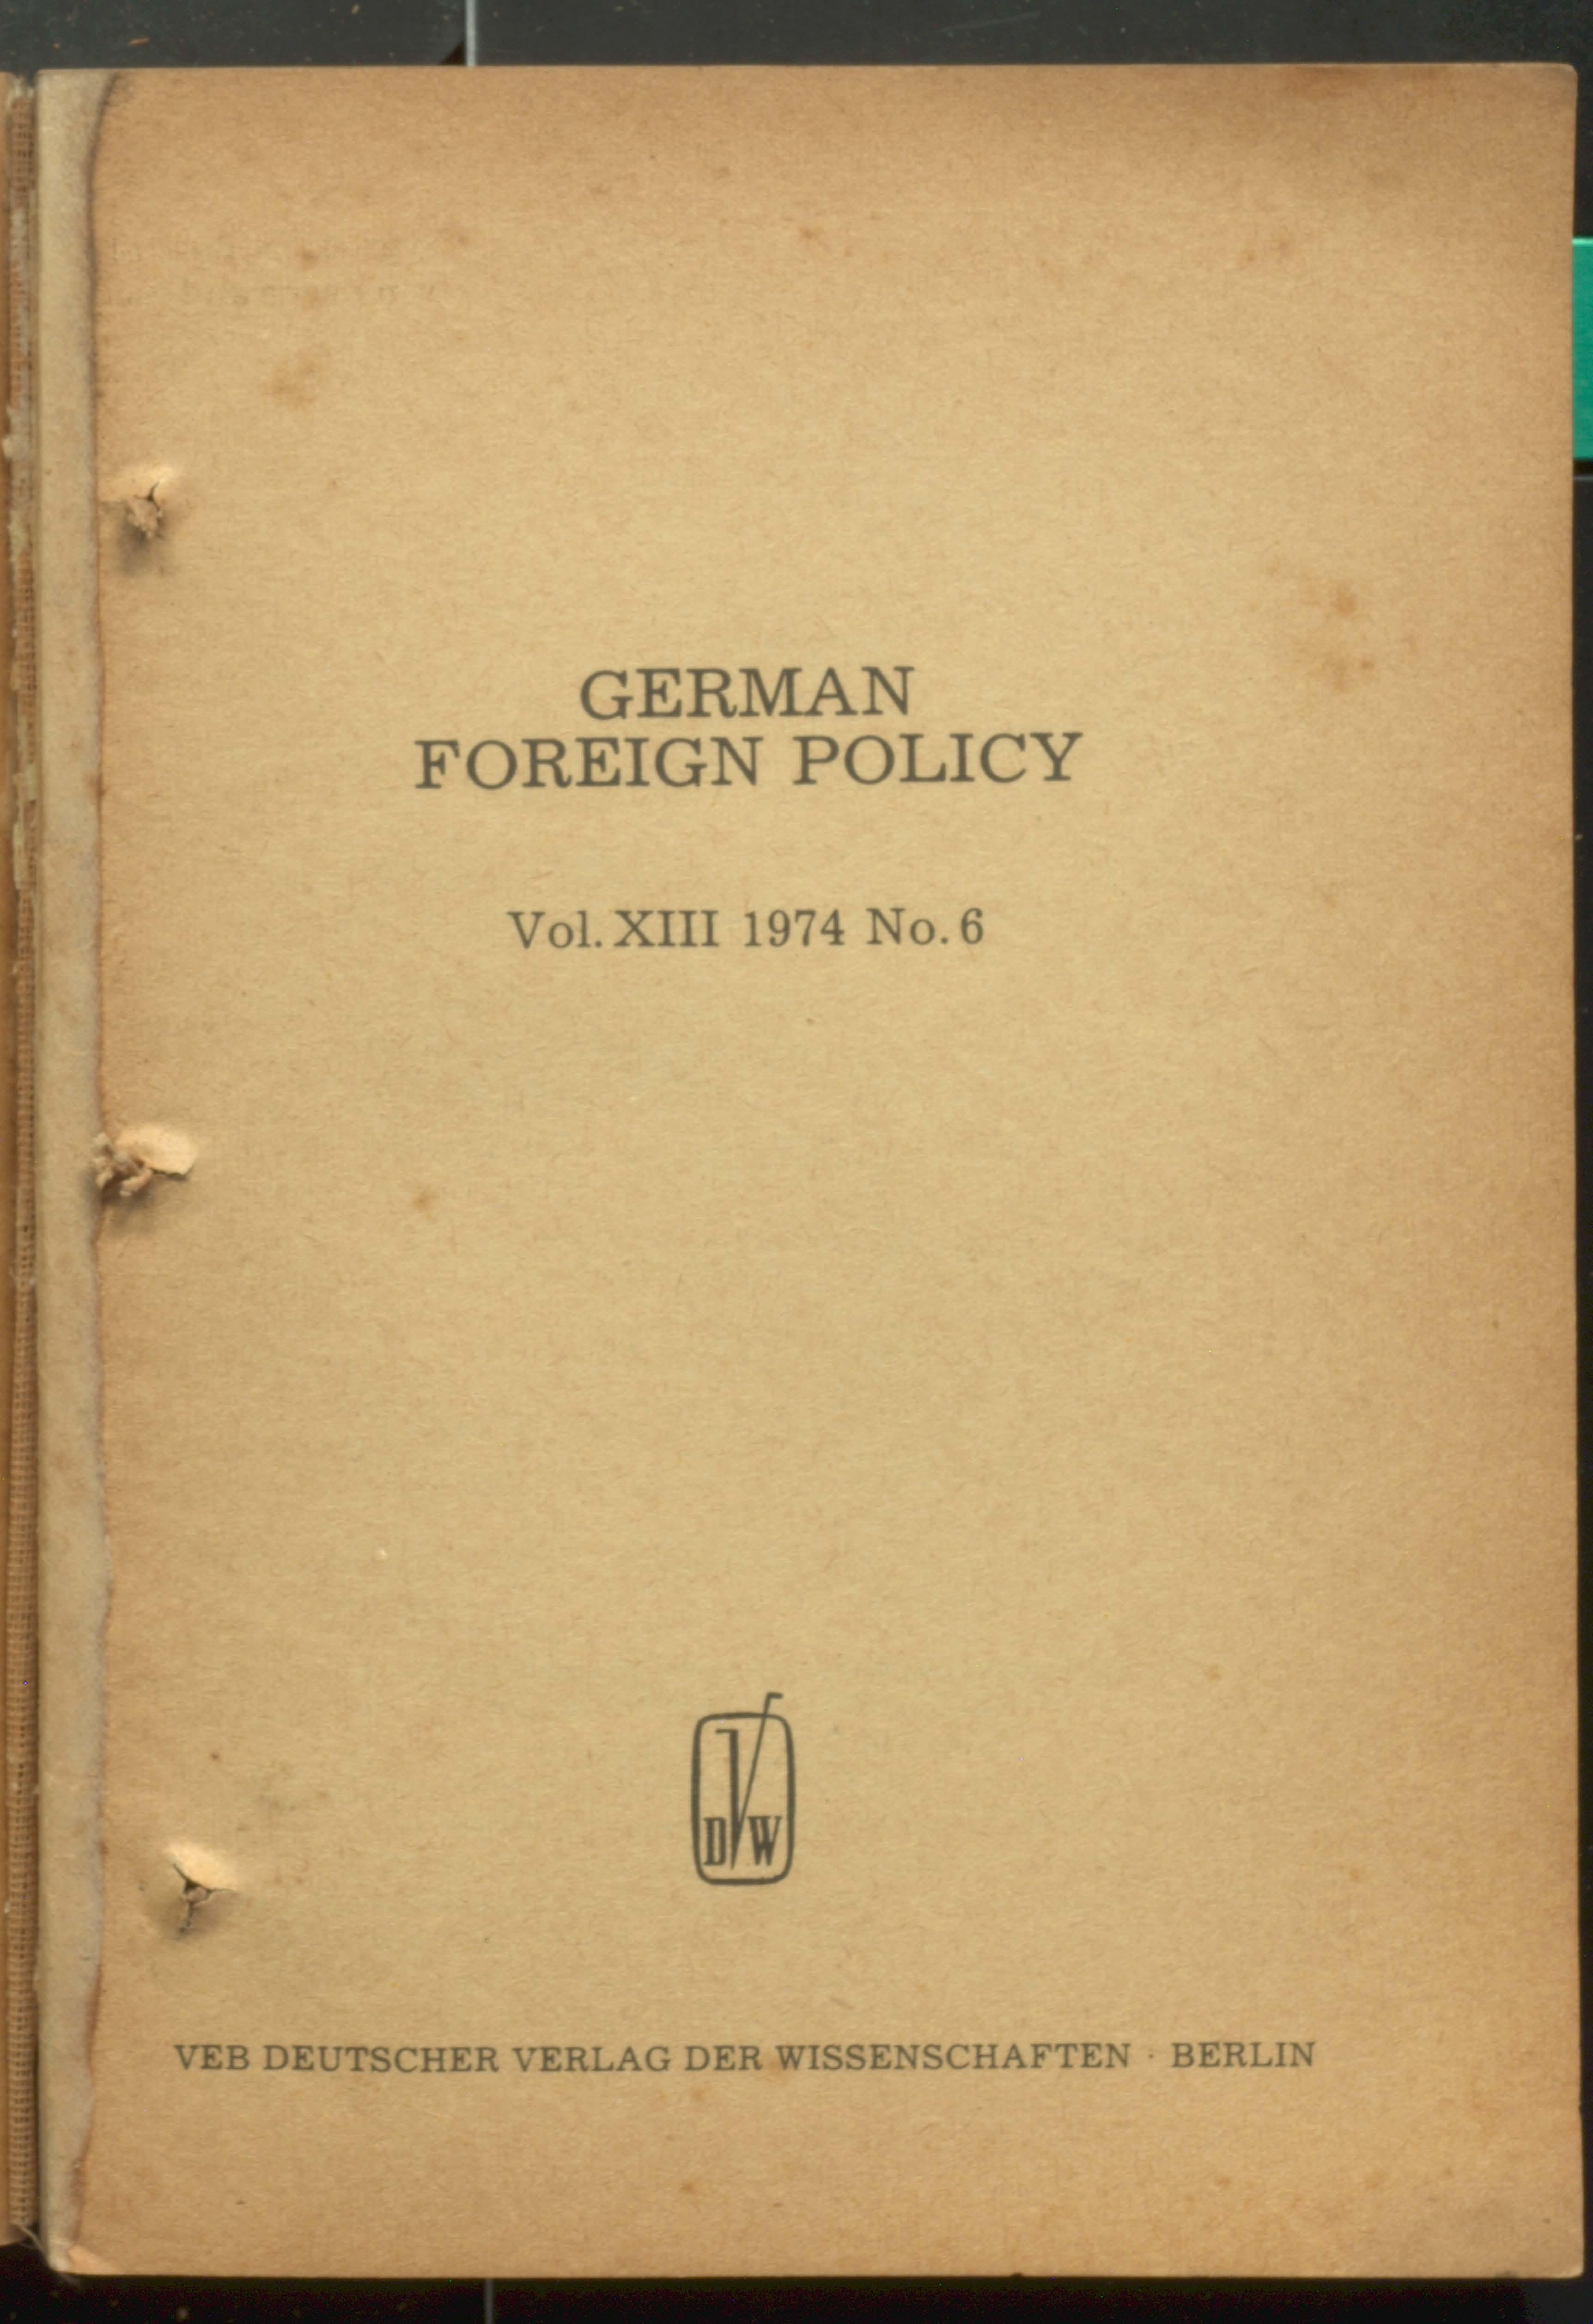 GERMAN FOREIGN POLICY voi.xIII 1974 no.6